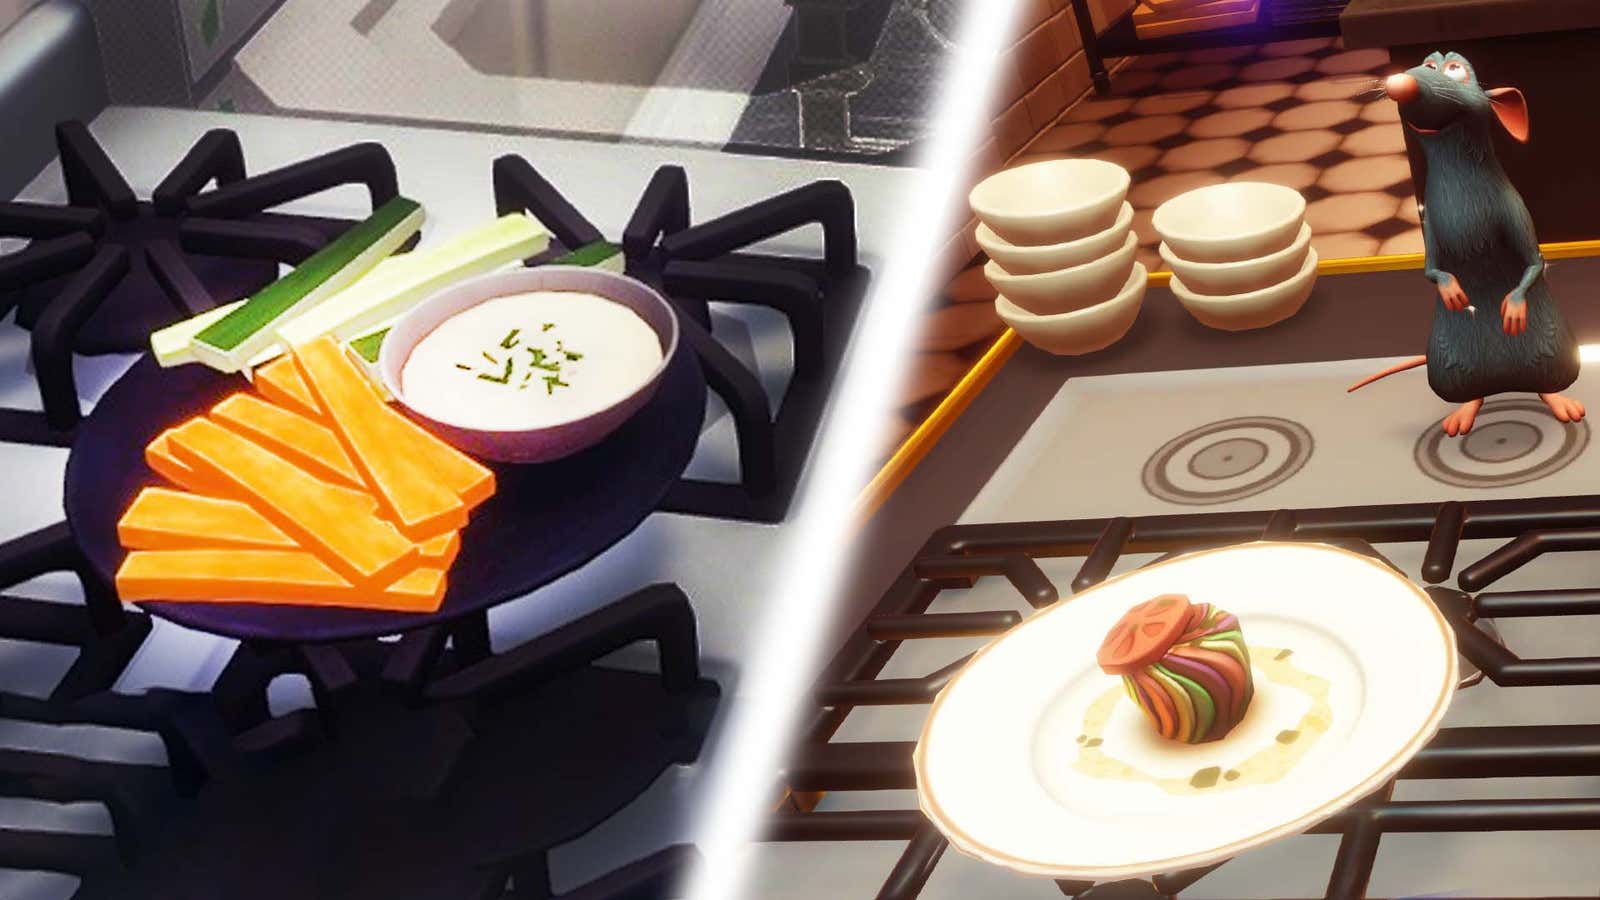 An image shows crudites and the ratatouille dish as seen in Dreamlight Valley 